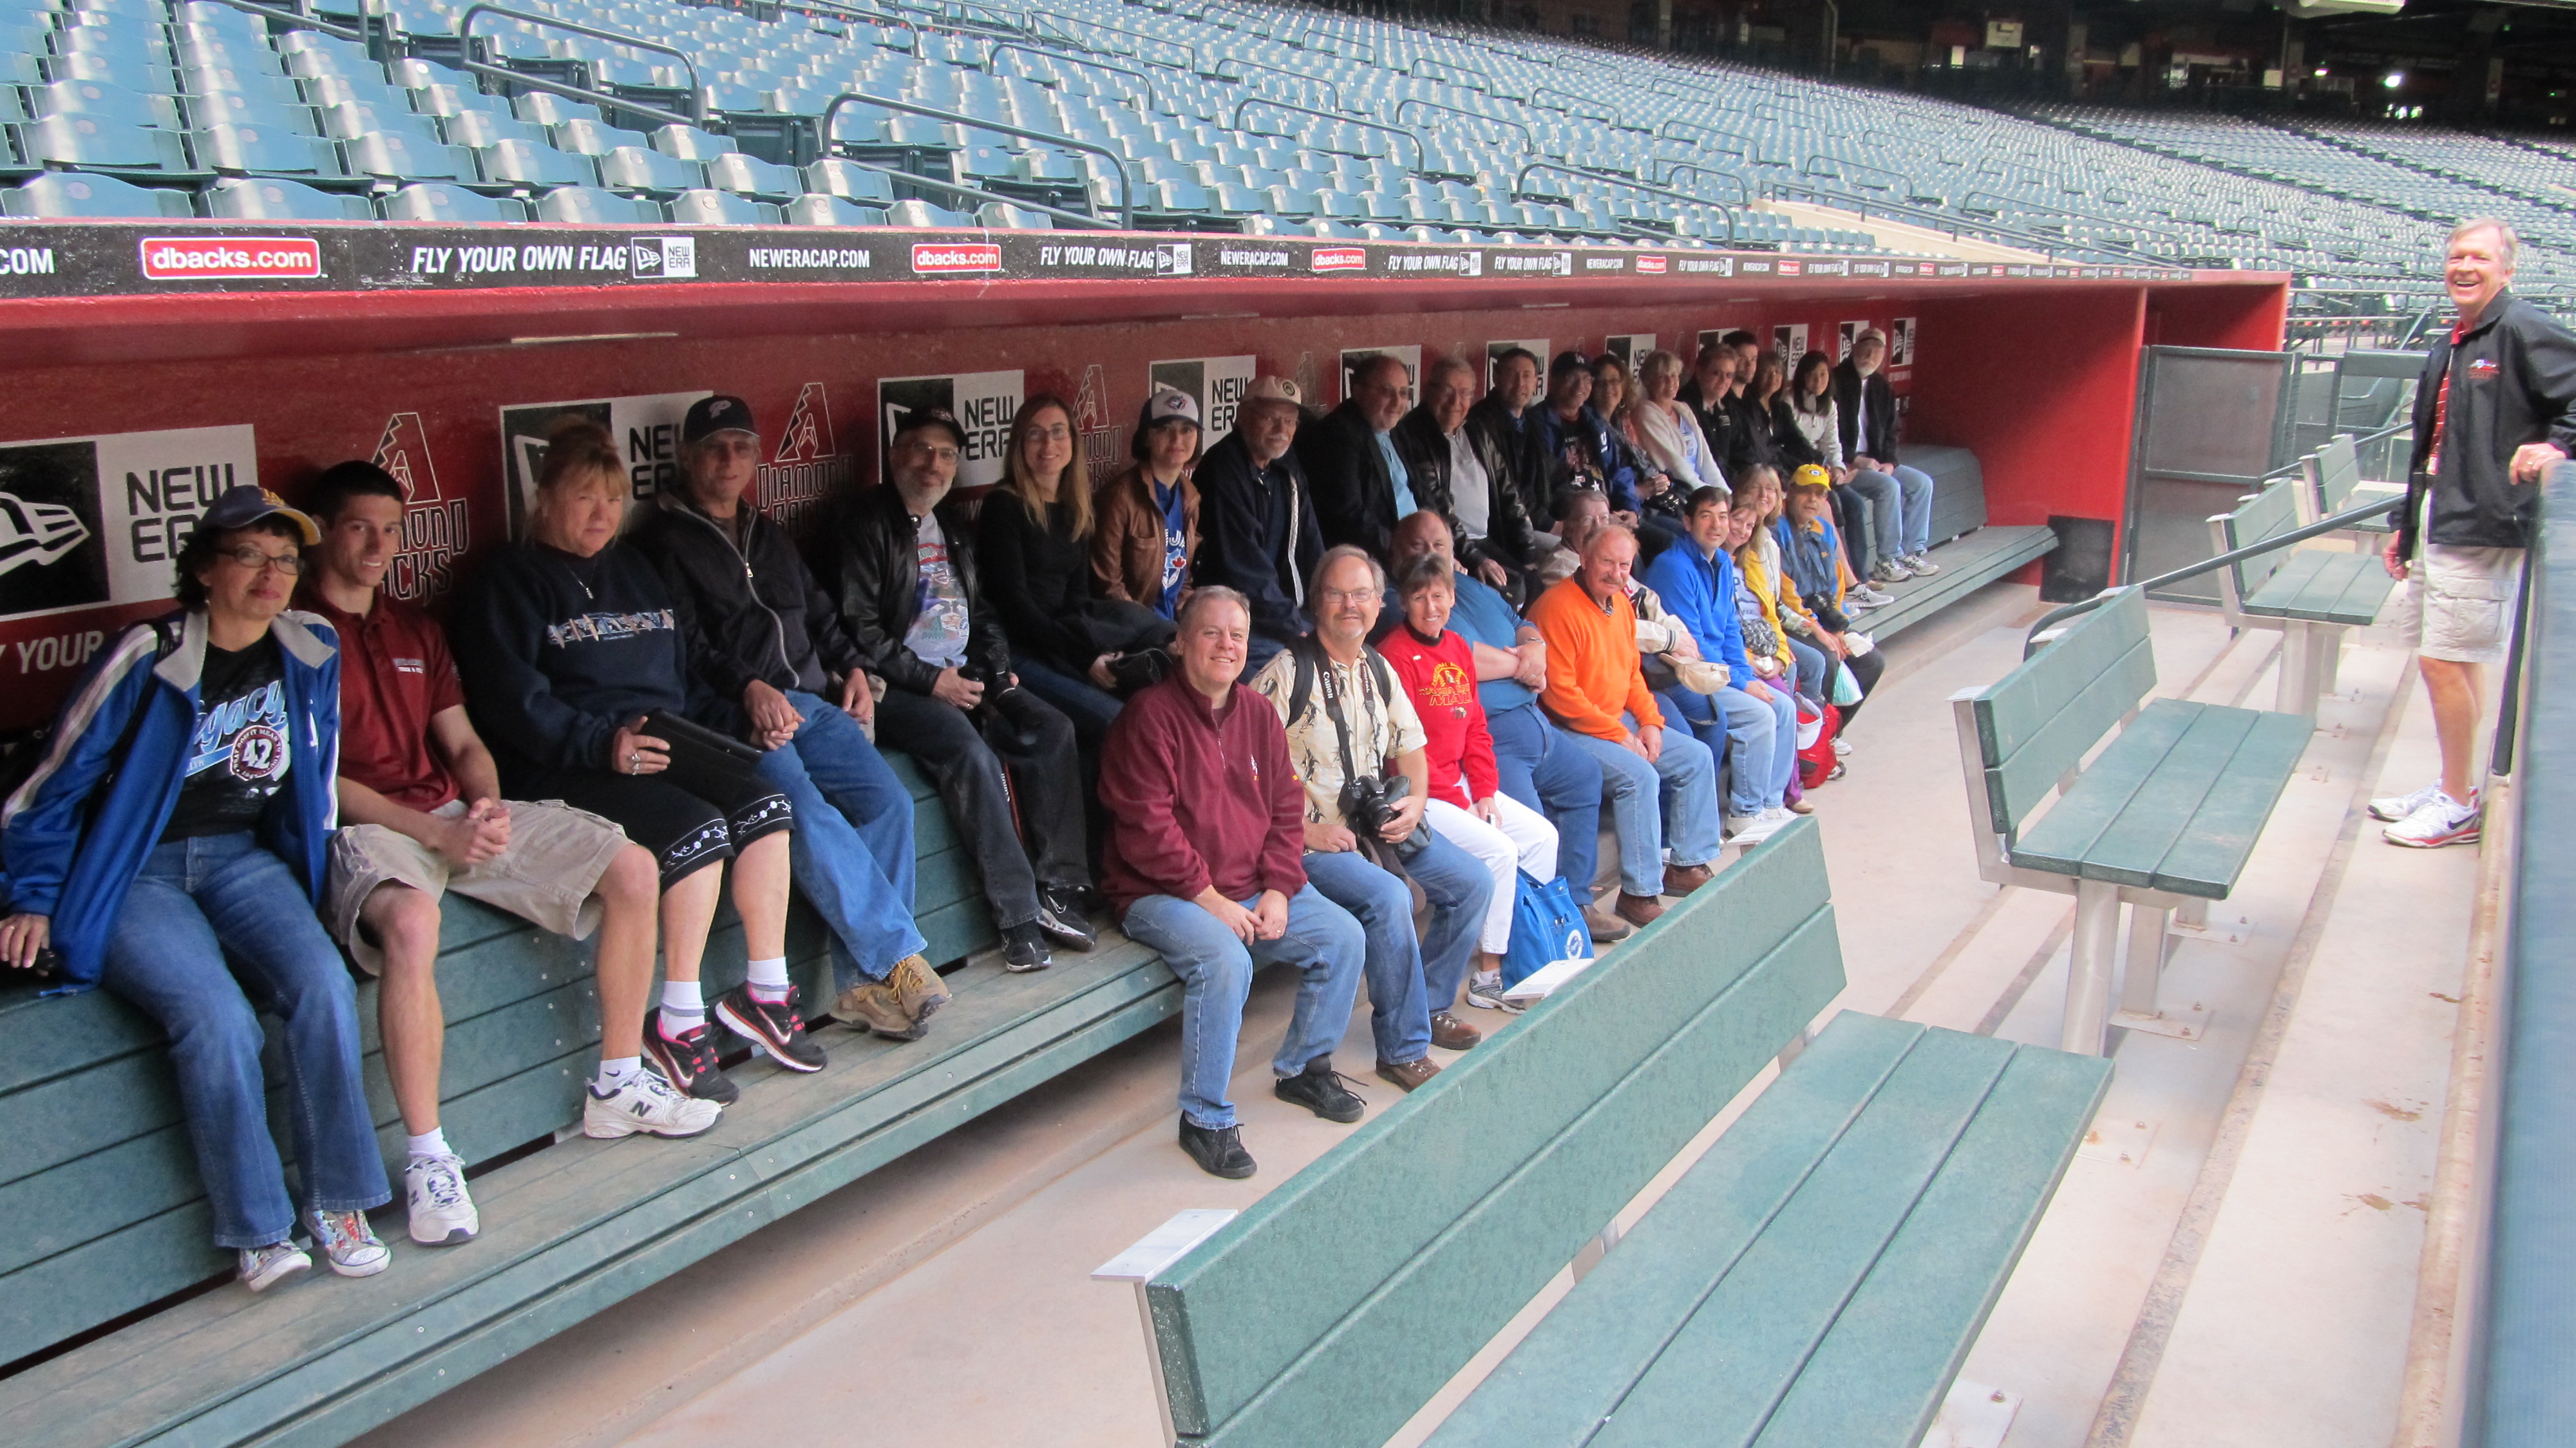 Tour of Chase Field